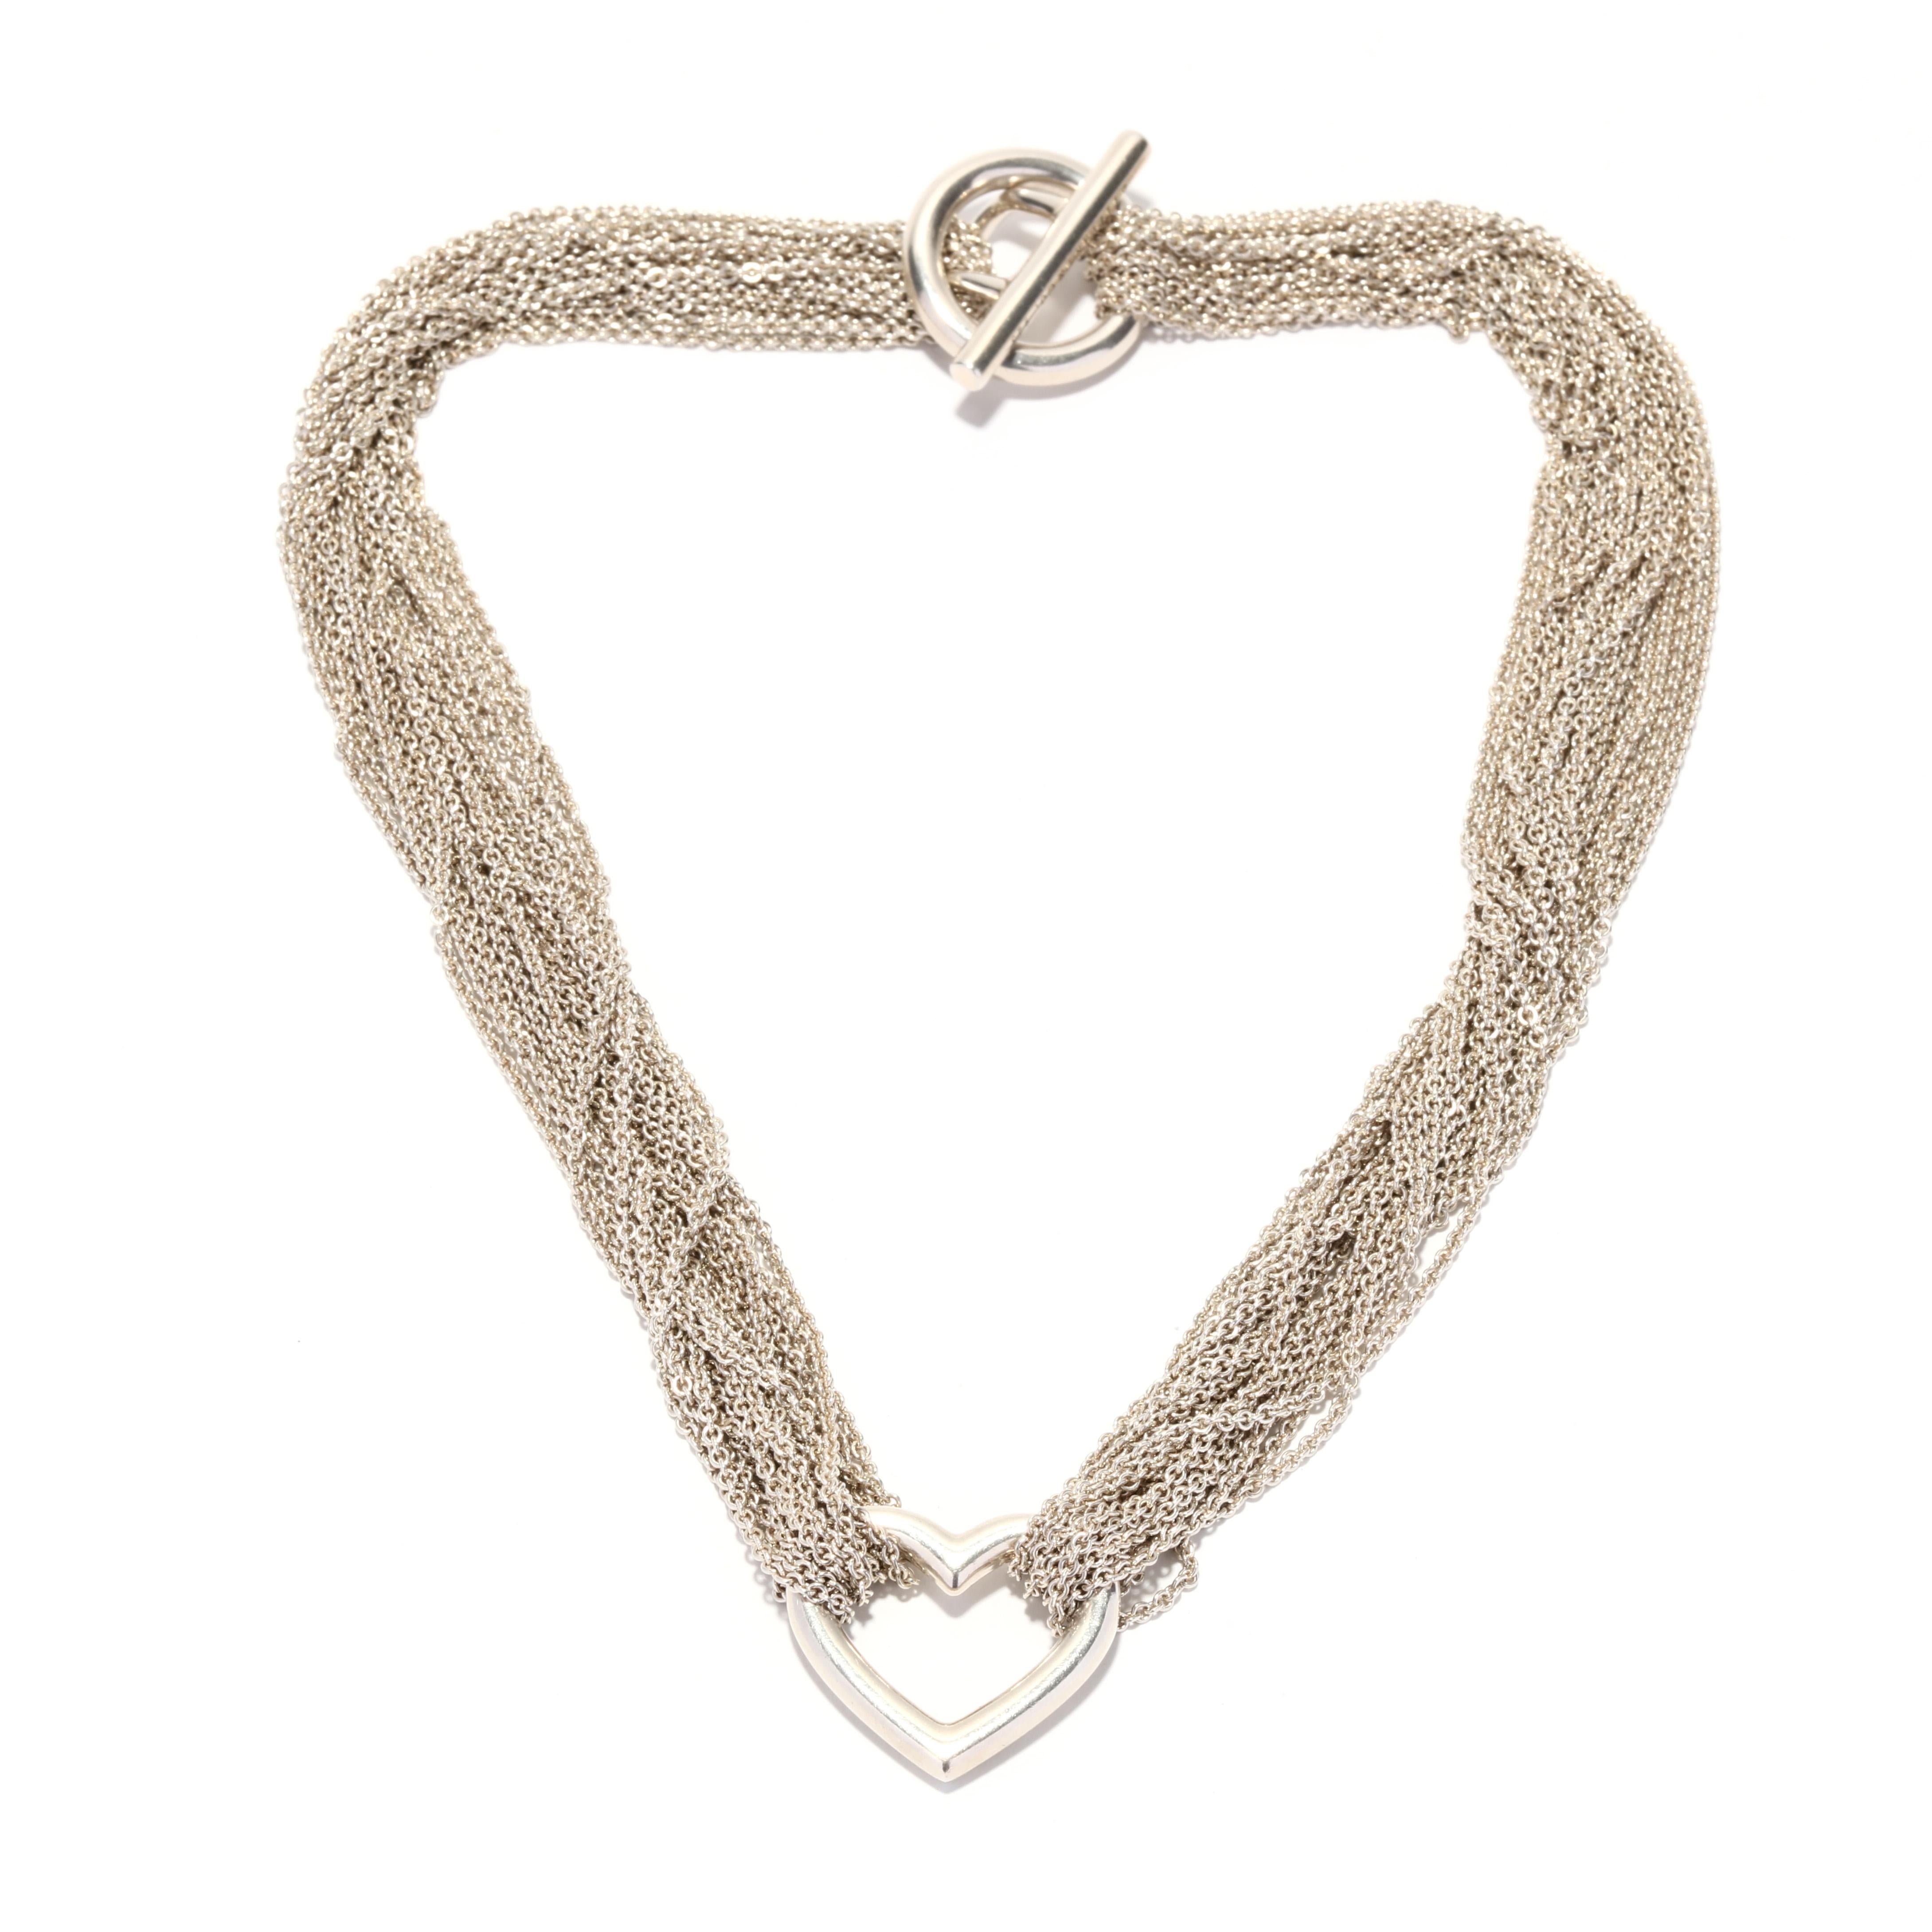 A vintage Tiffany and Company sterling silver heart necklace. This classic style necklace features twenty strands of silver cable chain connected in the center with an open heart motif and with an oversize toggle clasp. This necklace is accompanied